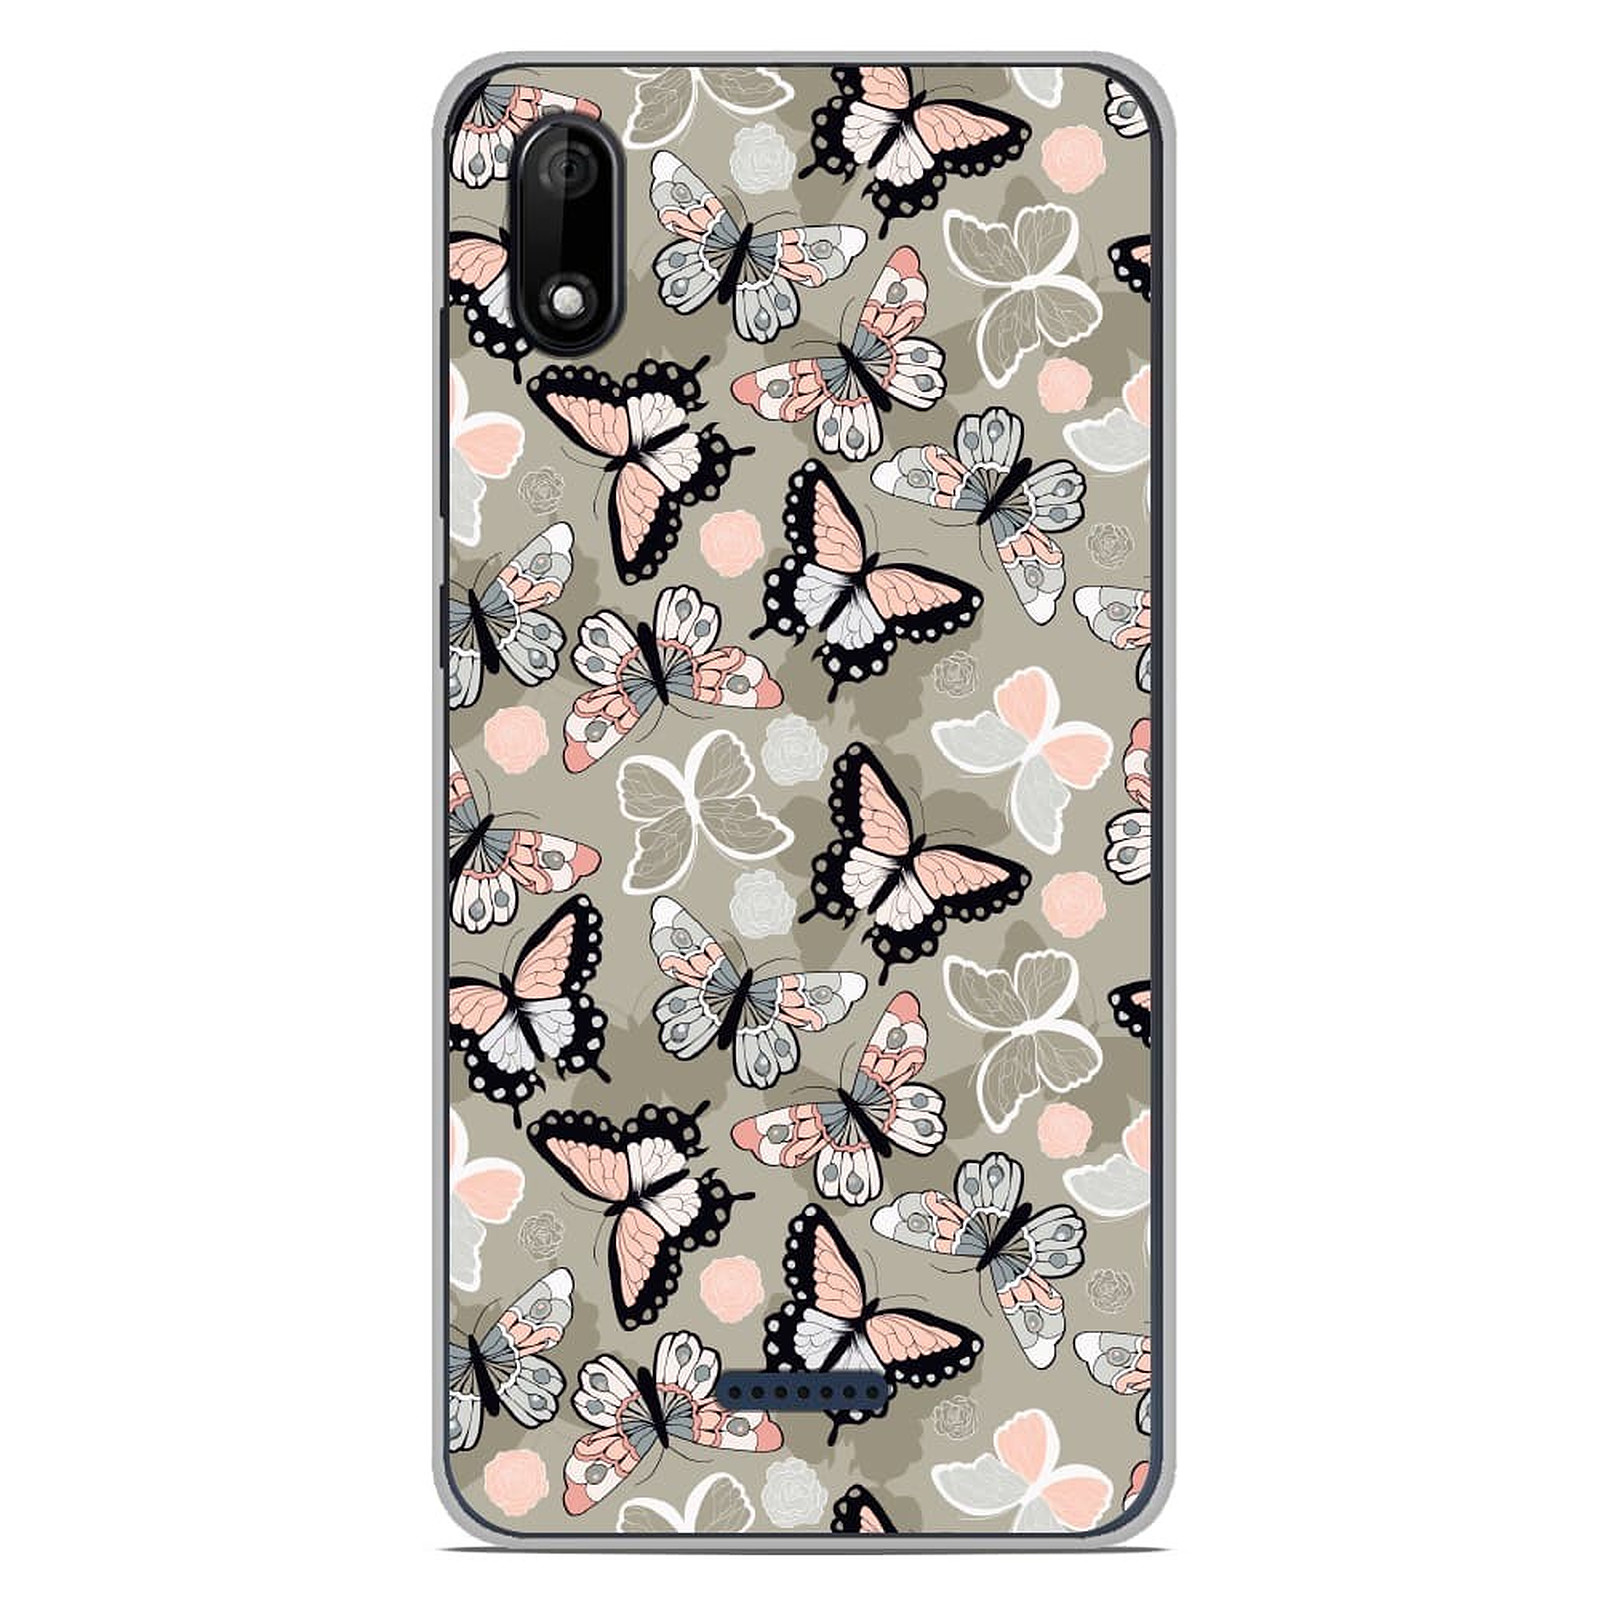 1001 Coques Coque silicone gel Wiko Y80 motif Papillons Vintage - Coque telephone 1001Coques